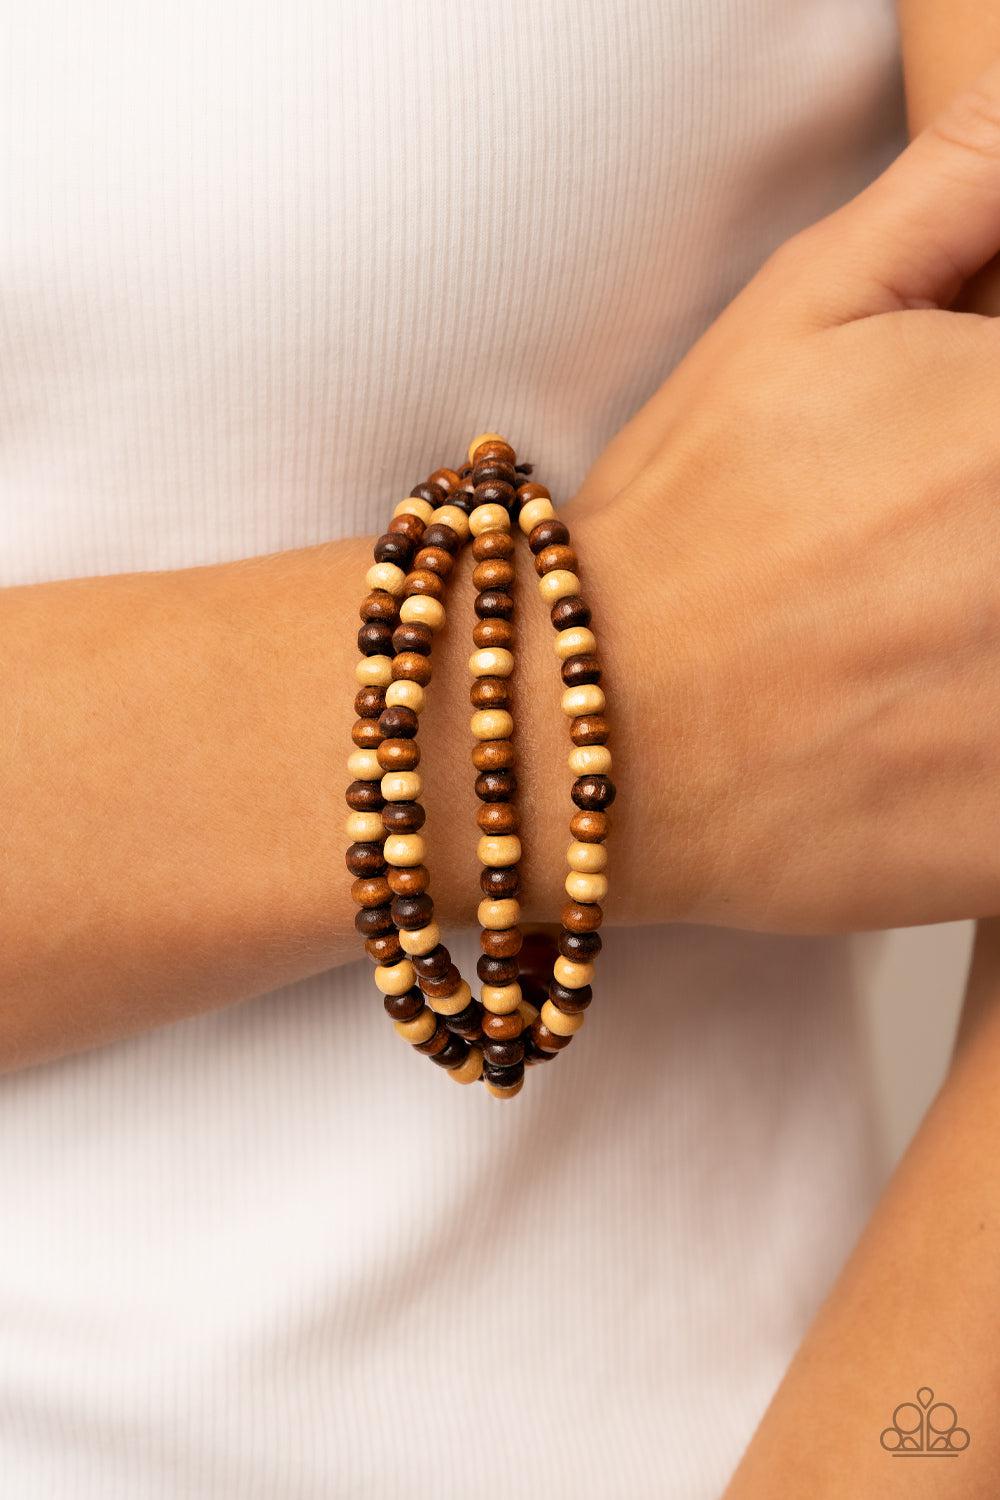 Oceania Oasis Brown Wood Bracelet - Paparazzi Accessories-on model - CarasShop.com - $5 Jewelry by Cara Jewels